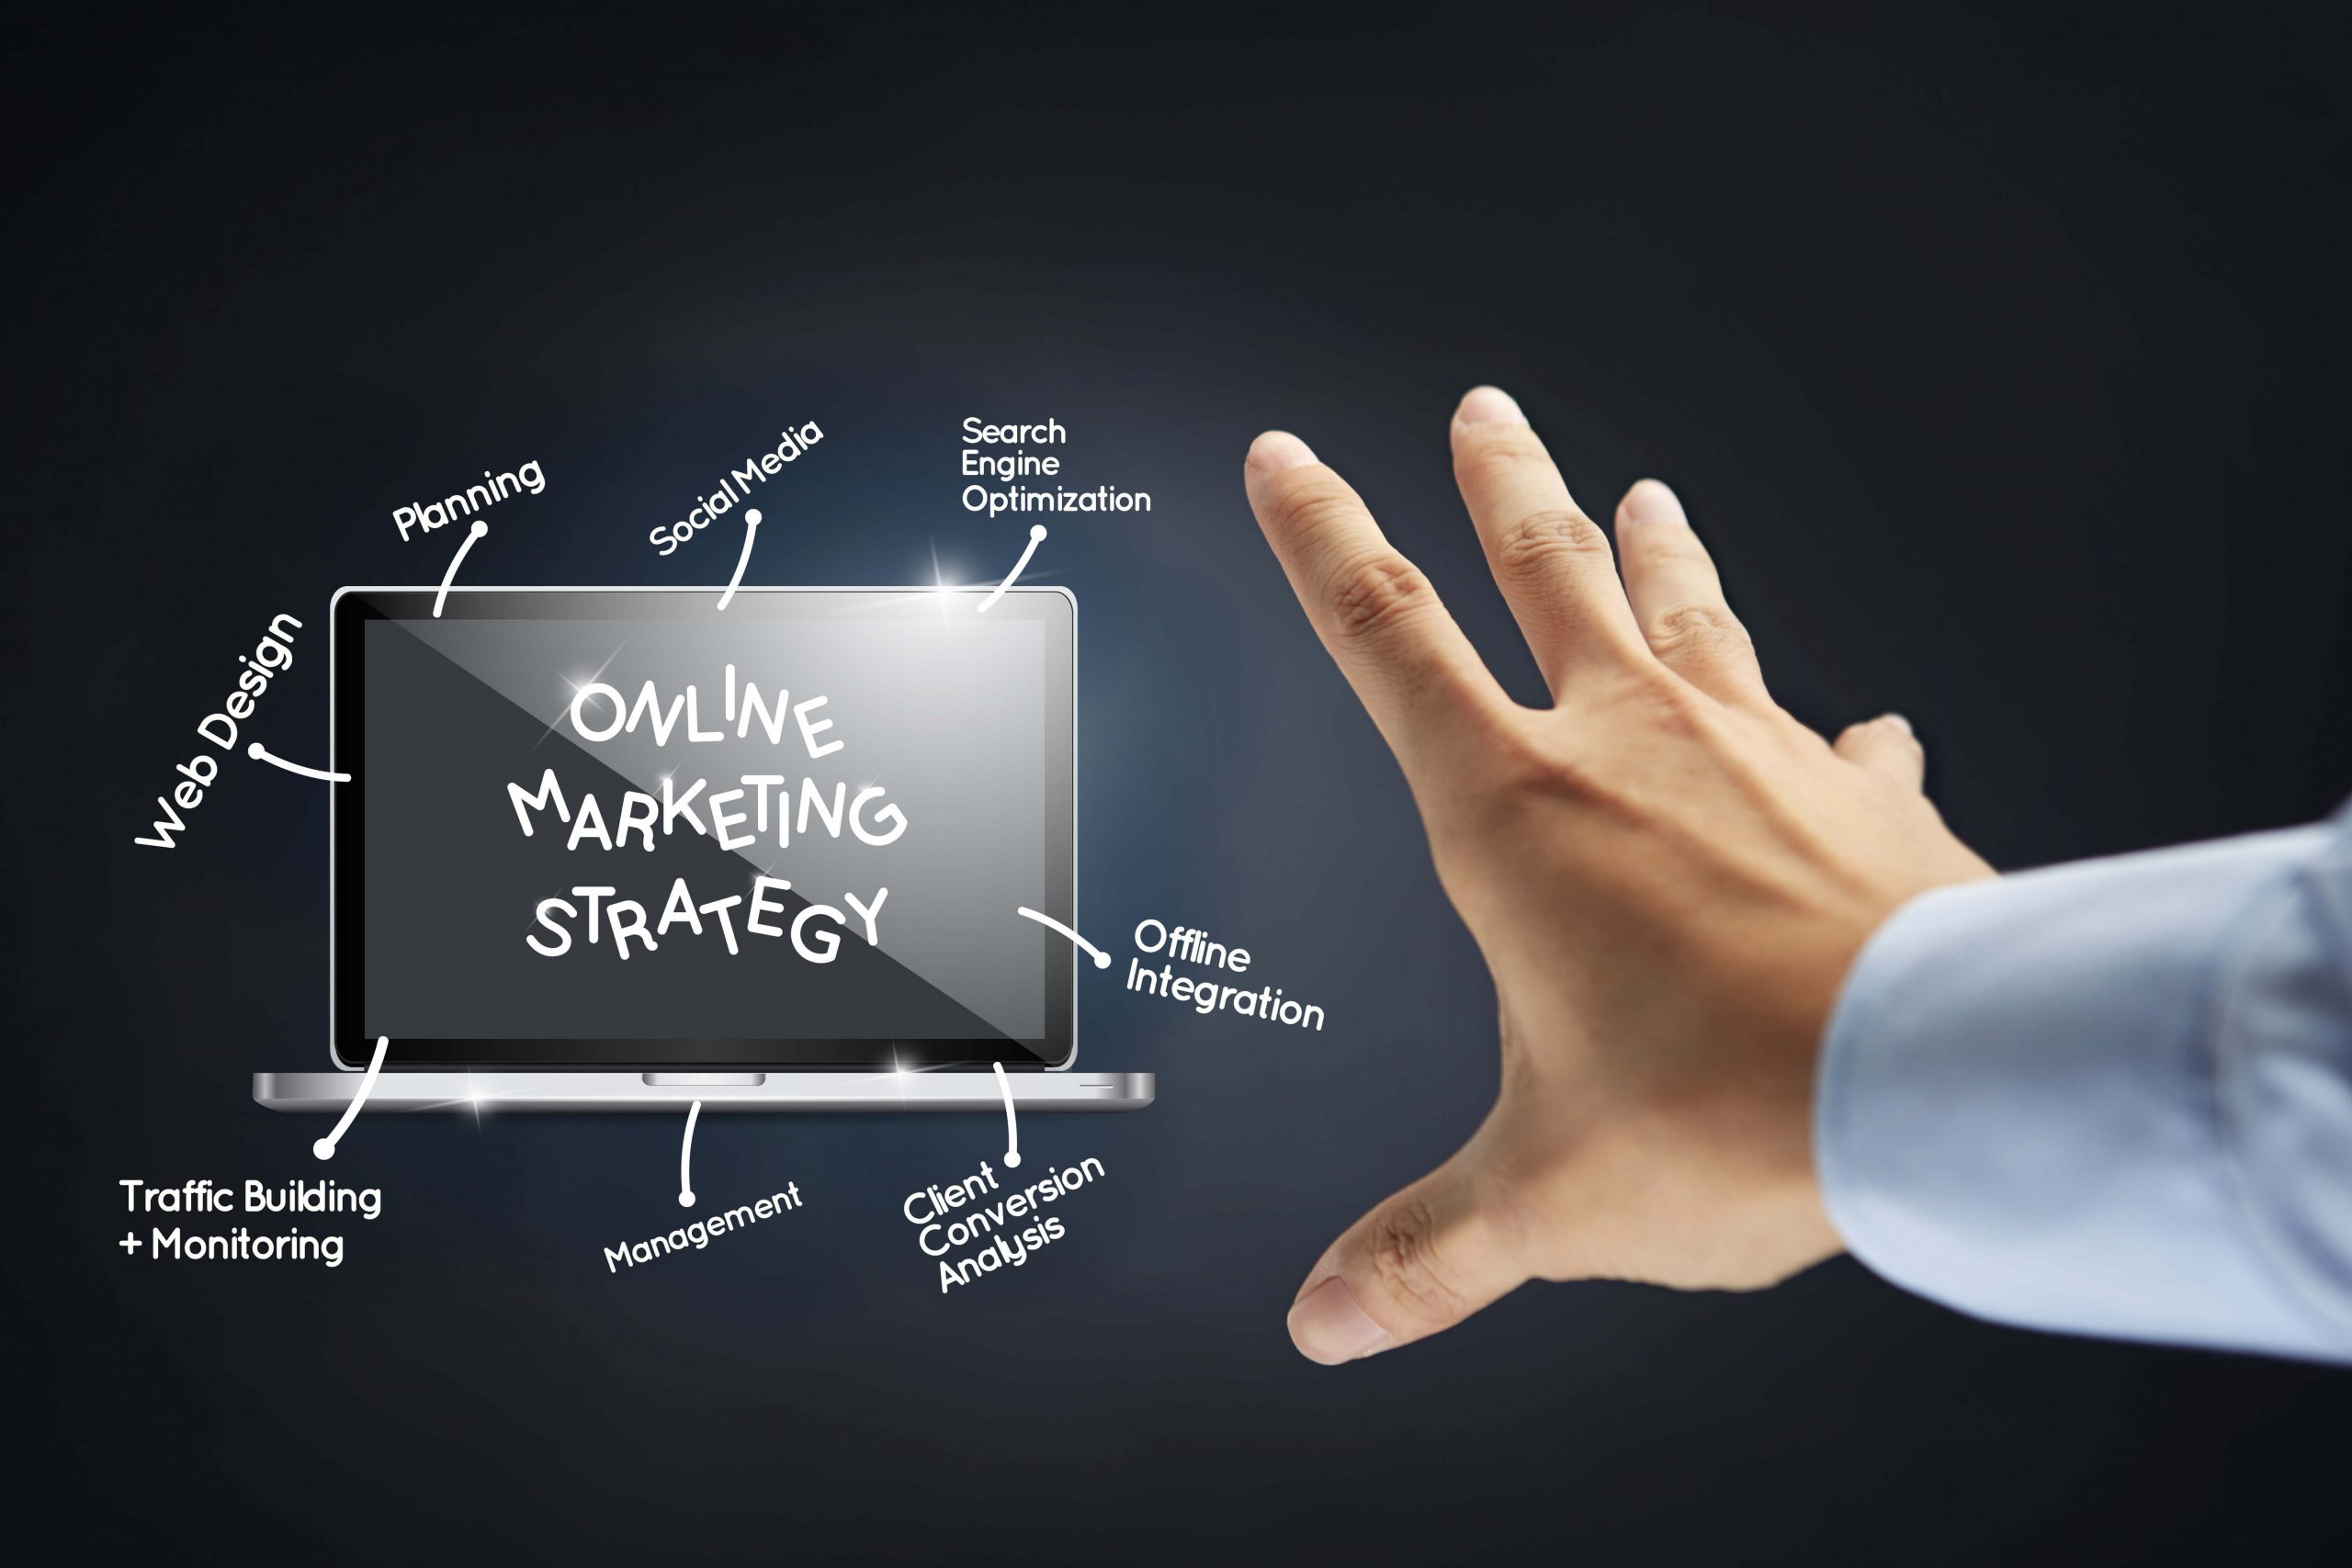 The 5 Key Elements of a Strong Digital Marketing Strategy